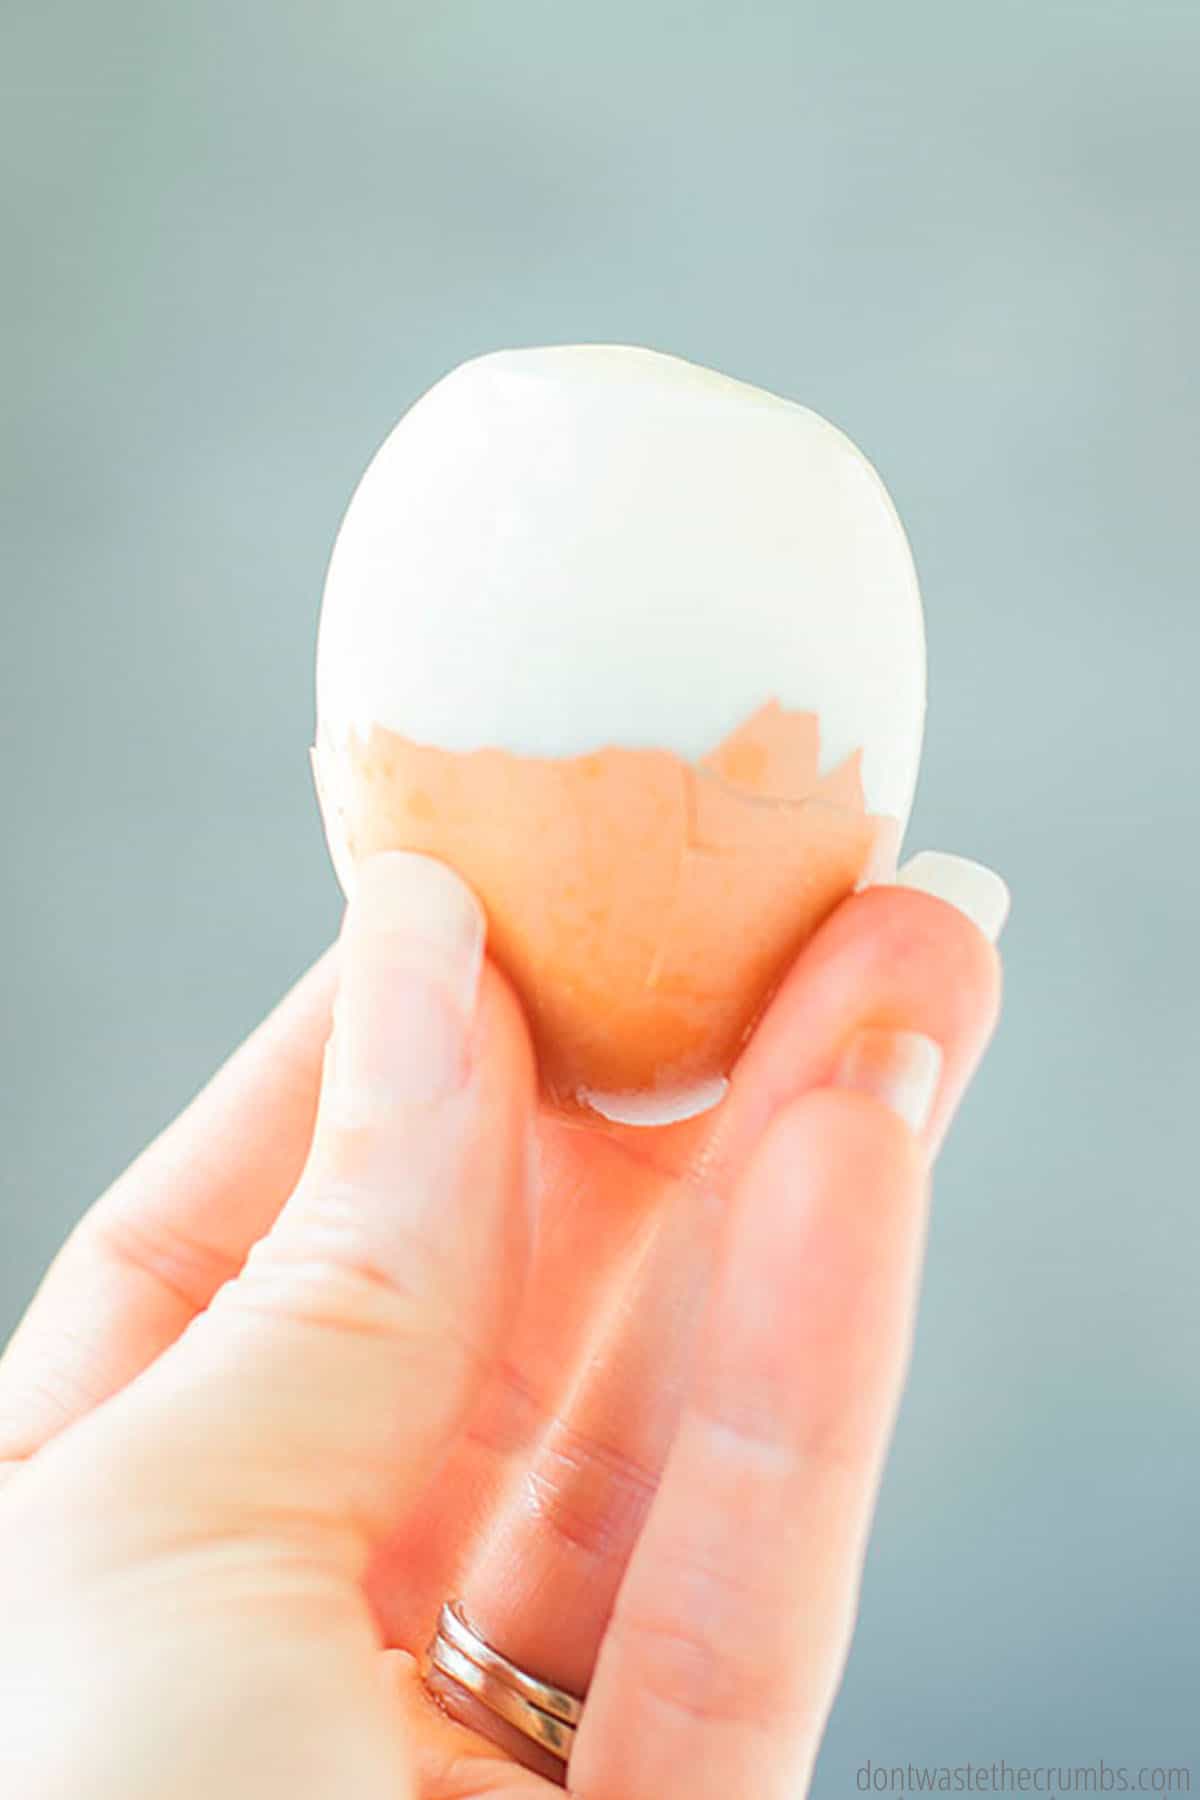 Hand holding an egg with half its peel removed.